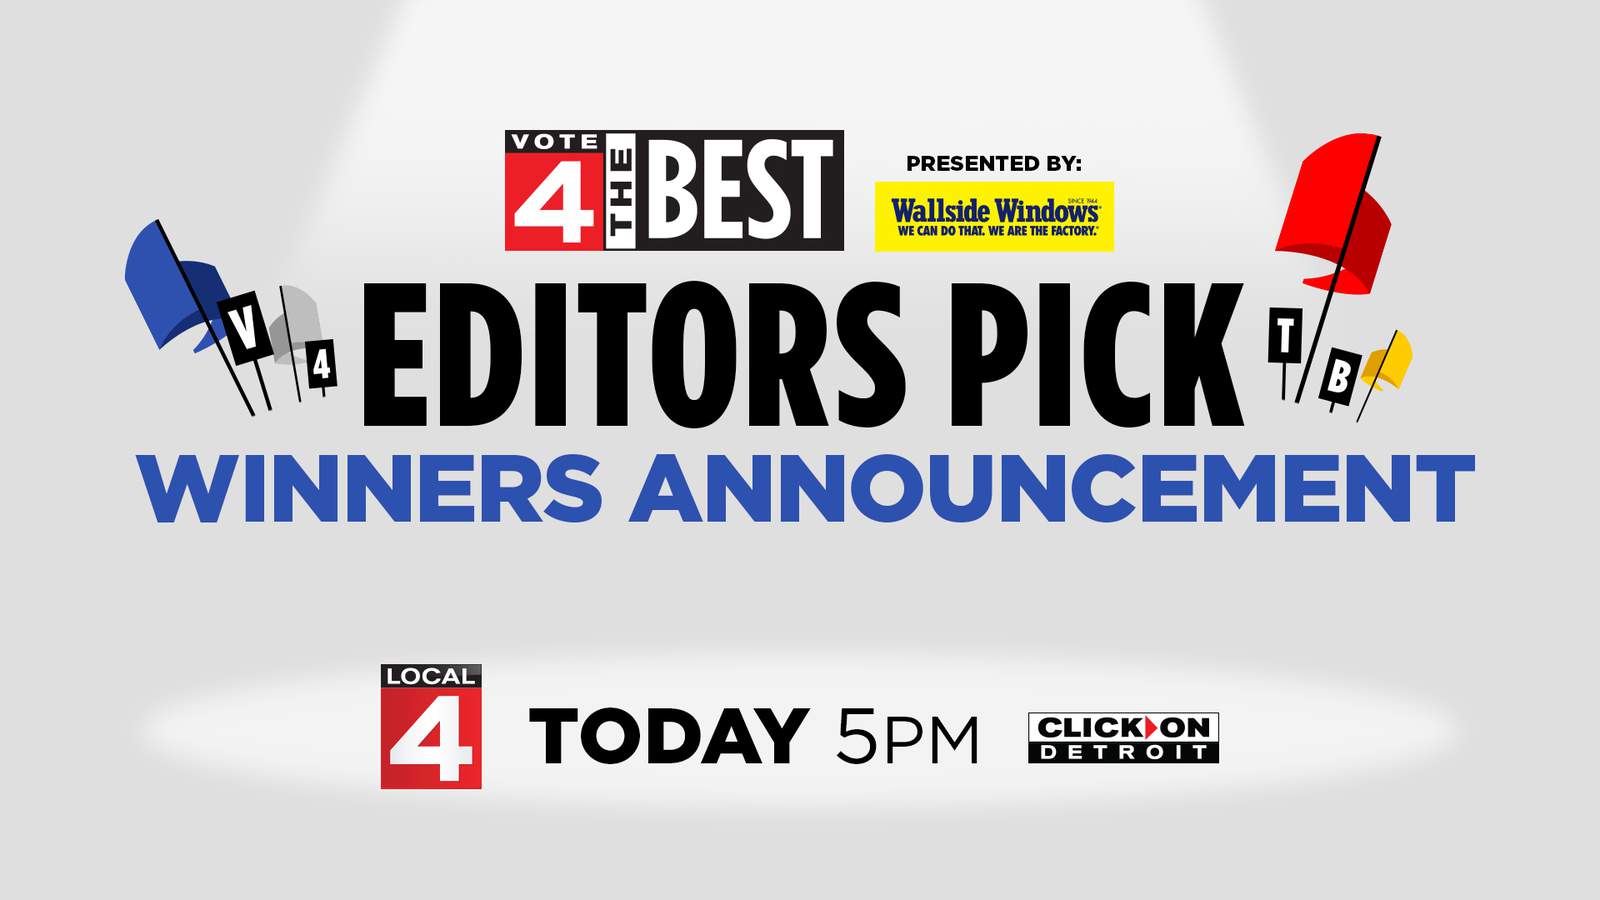 Vote 4 The Best: ‘Editors Pick’ Winners Announced Today